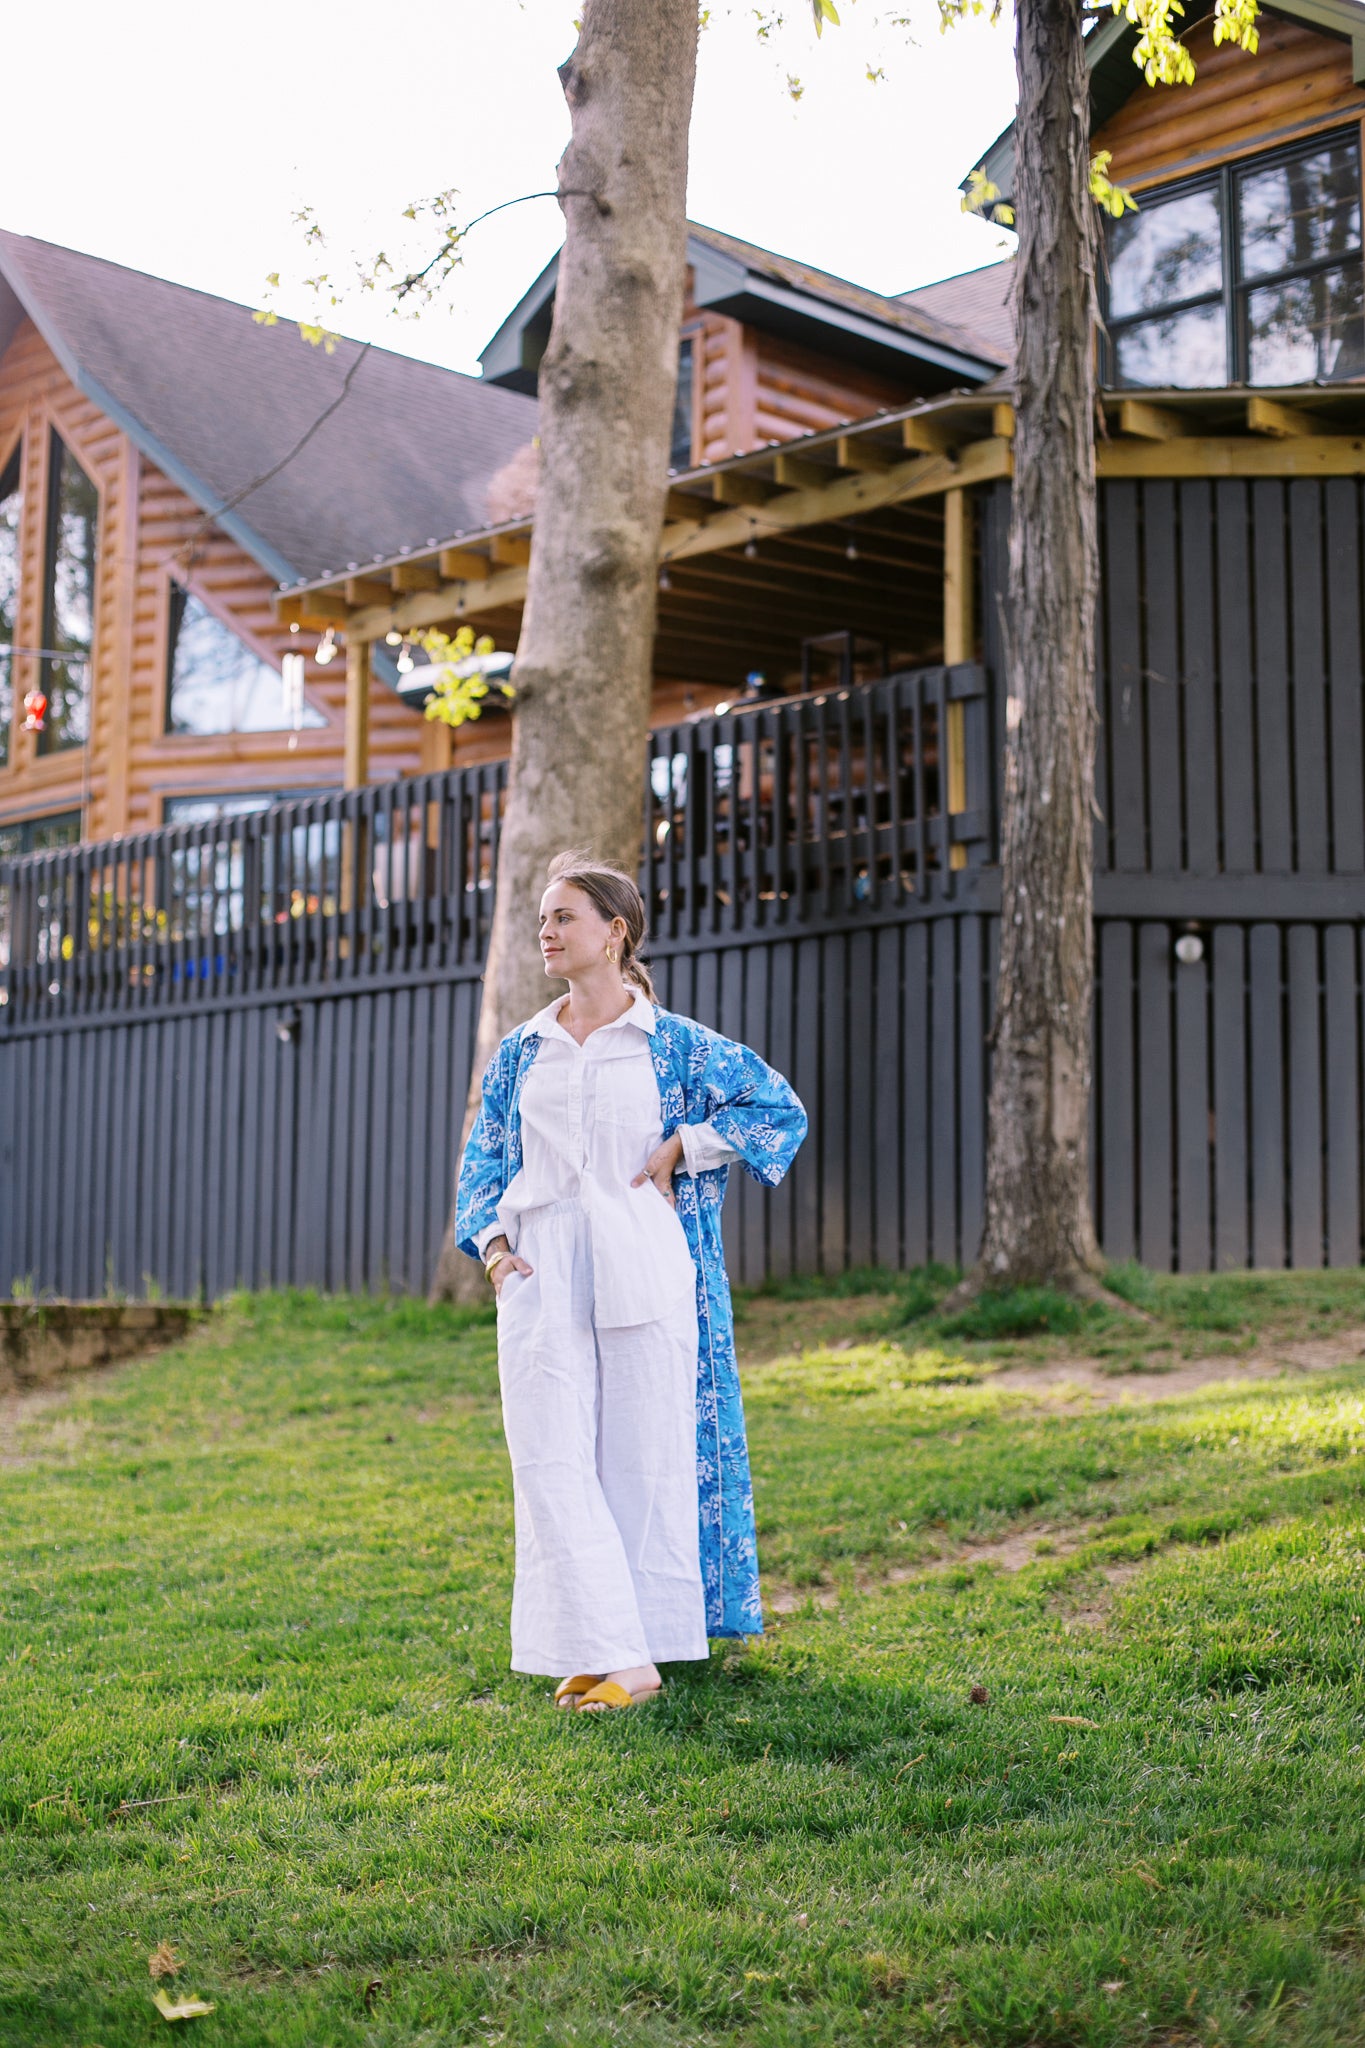 The Hemingway Robe in Blue Willow